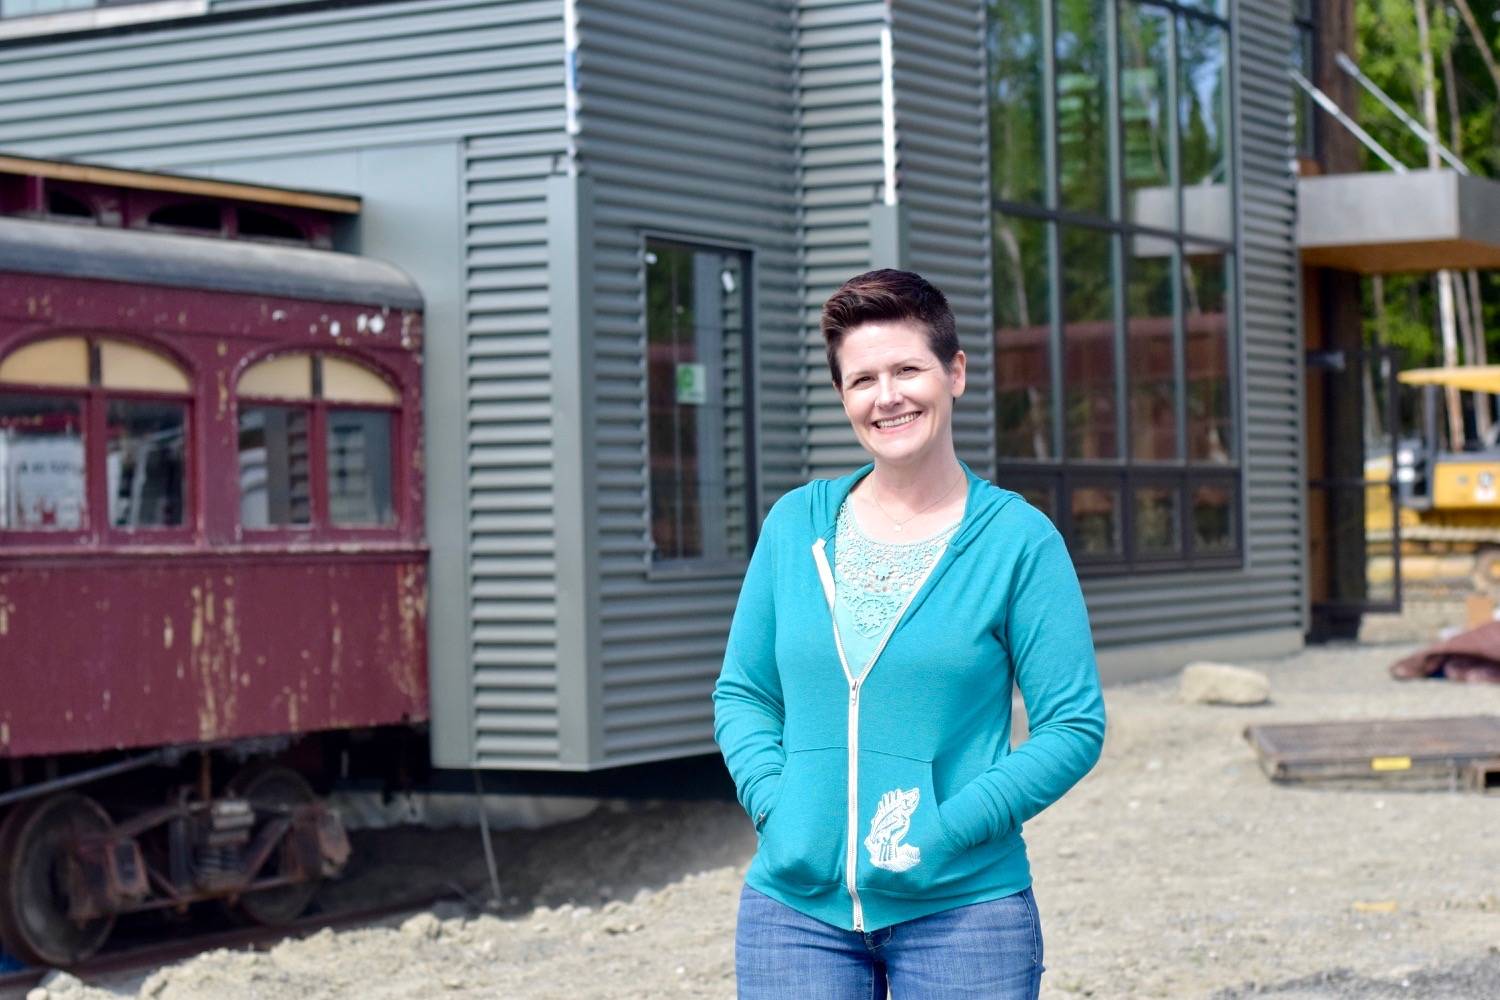 Addie Camp Dining Car eatery and wine bar’s chef Maya Wilson is still conceptualizing her menu Tuesday, June 12, 2018, in Soldotna, Alaska. She hopes to partner with peninsula farmers and vendors to offer as many local ingredients as possible. (Photo by Victoria Petersen/Peninsula Clarion)